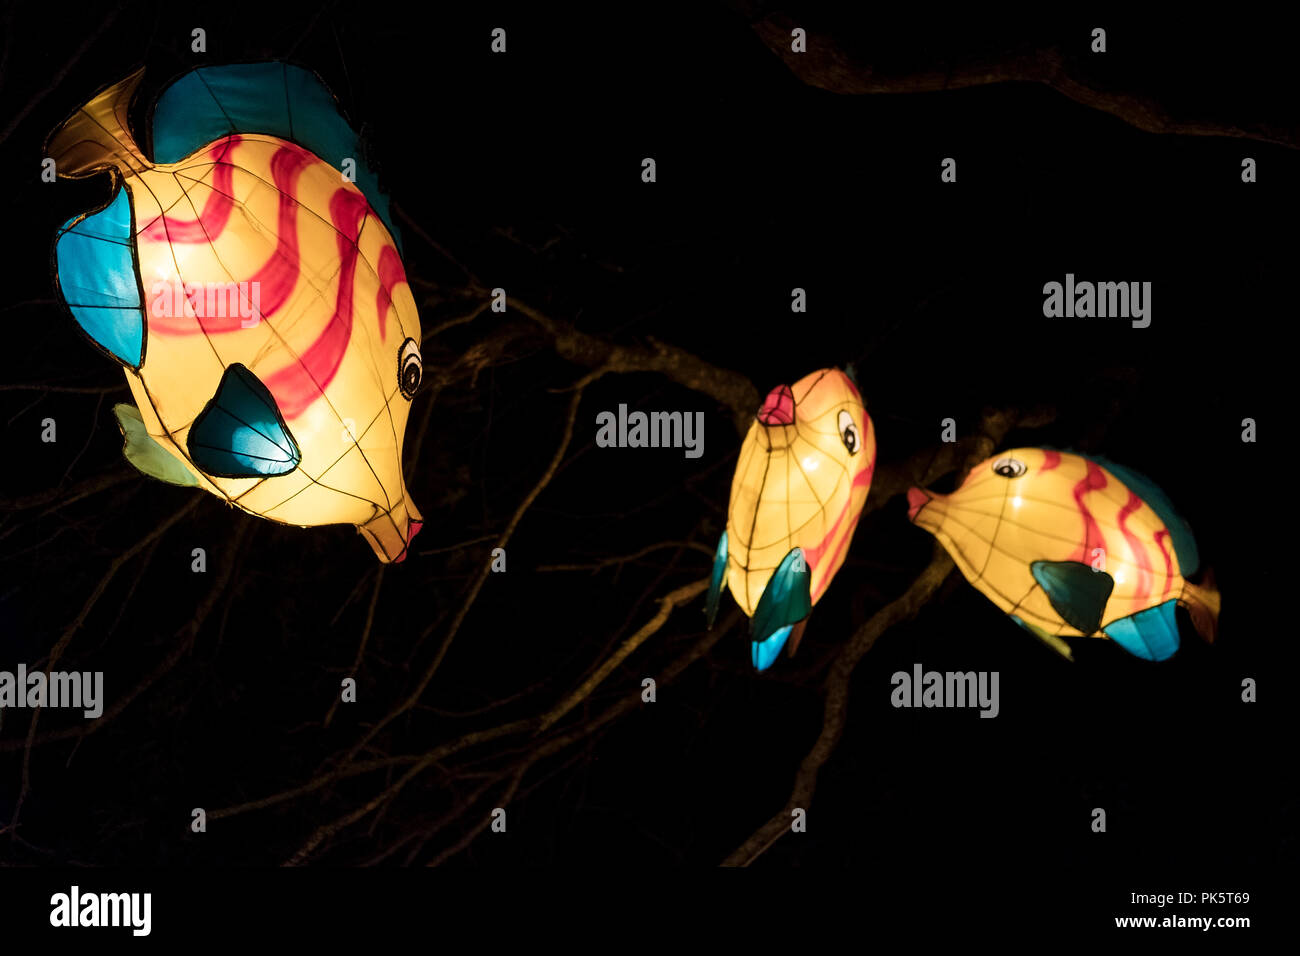 Chinese Lanterns of fish during festival in Auckland, New Zealand Stock Photo